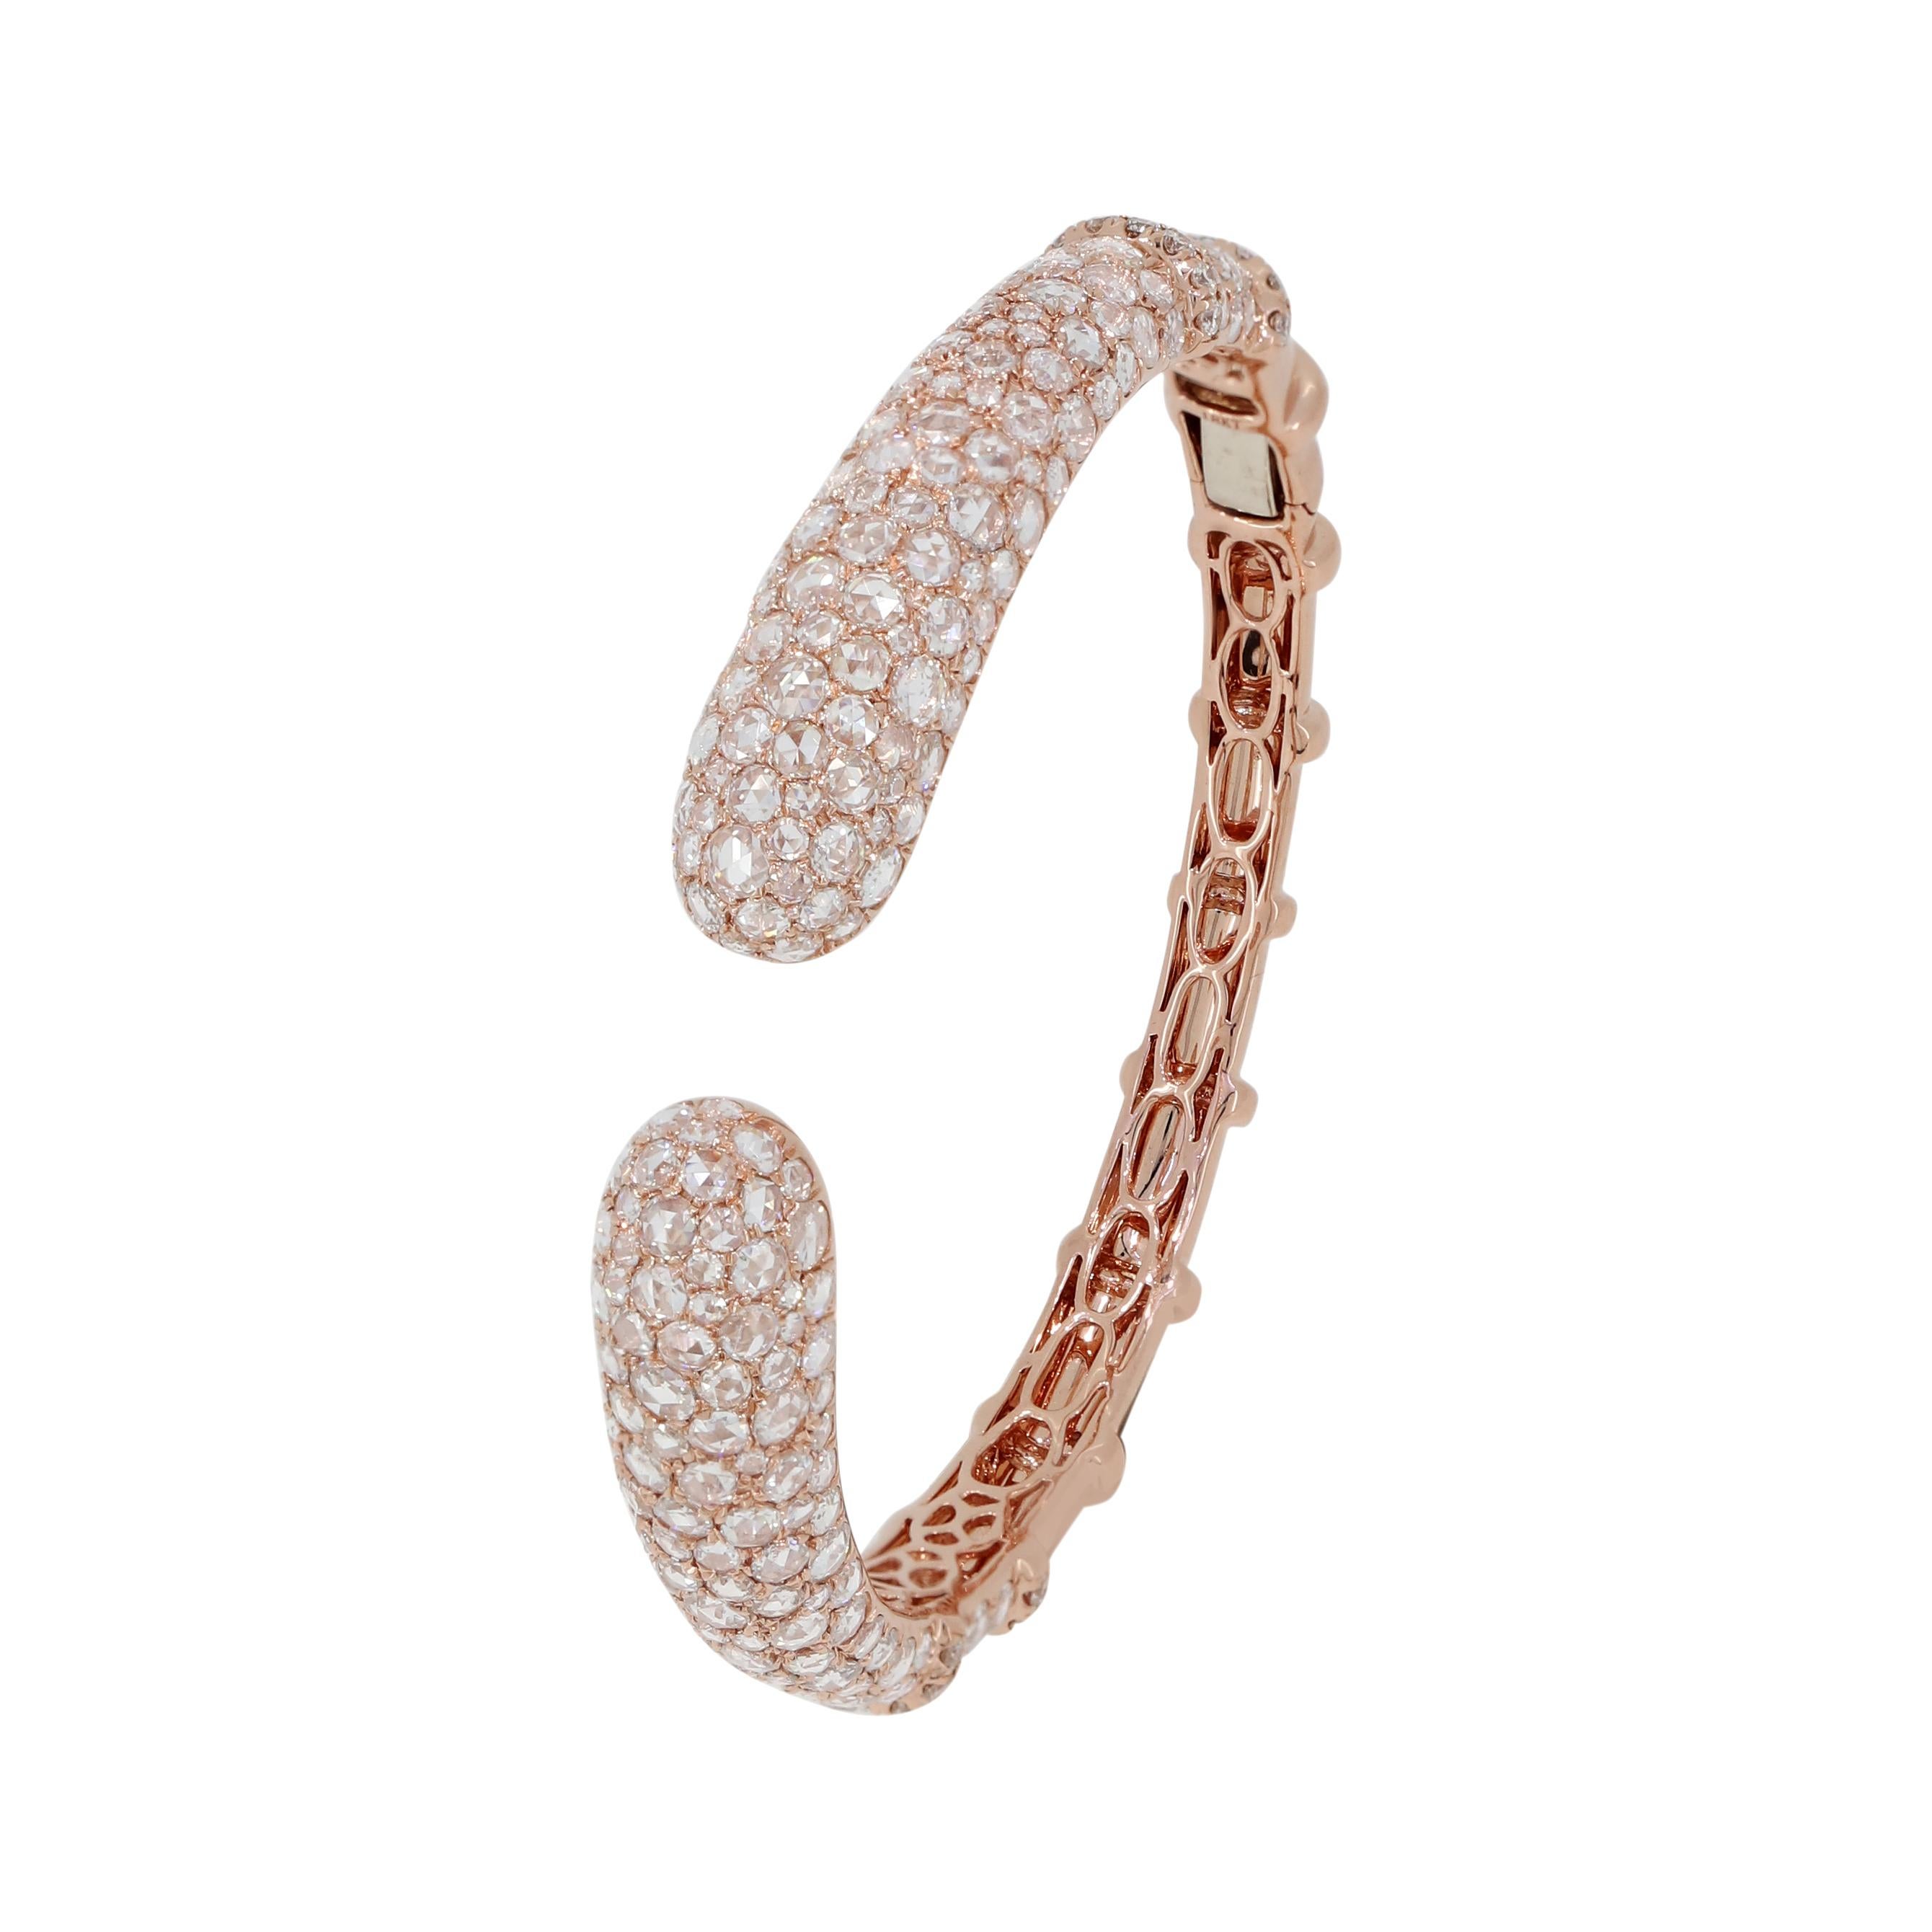 A stunning bangle crafted by Nigaam in 18K Rose gold with delicate diamond detailing 8.36 Ct total weight is designed to make you fall in love with sophistication and shine.
Please follow the Luxury Jewels storefront to view the latest collections &